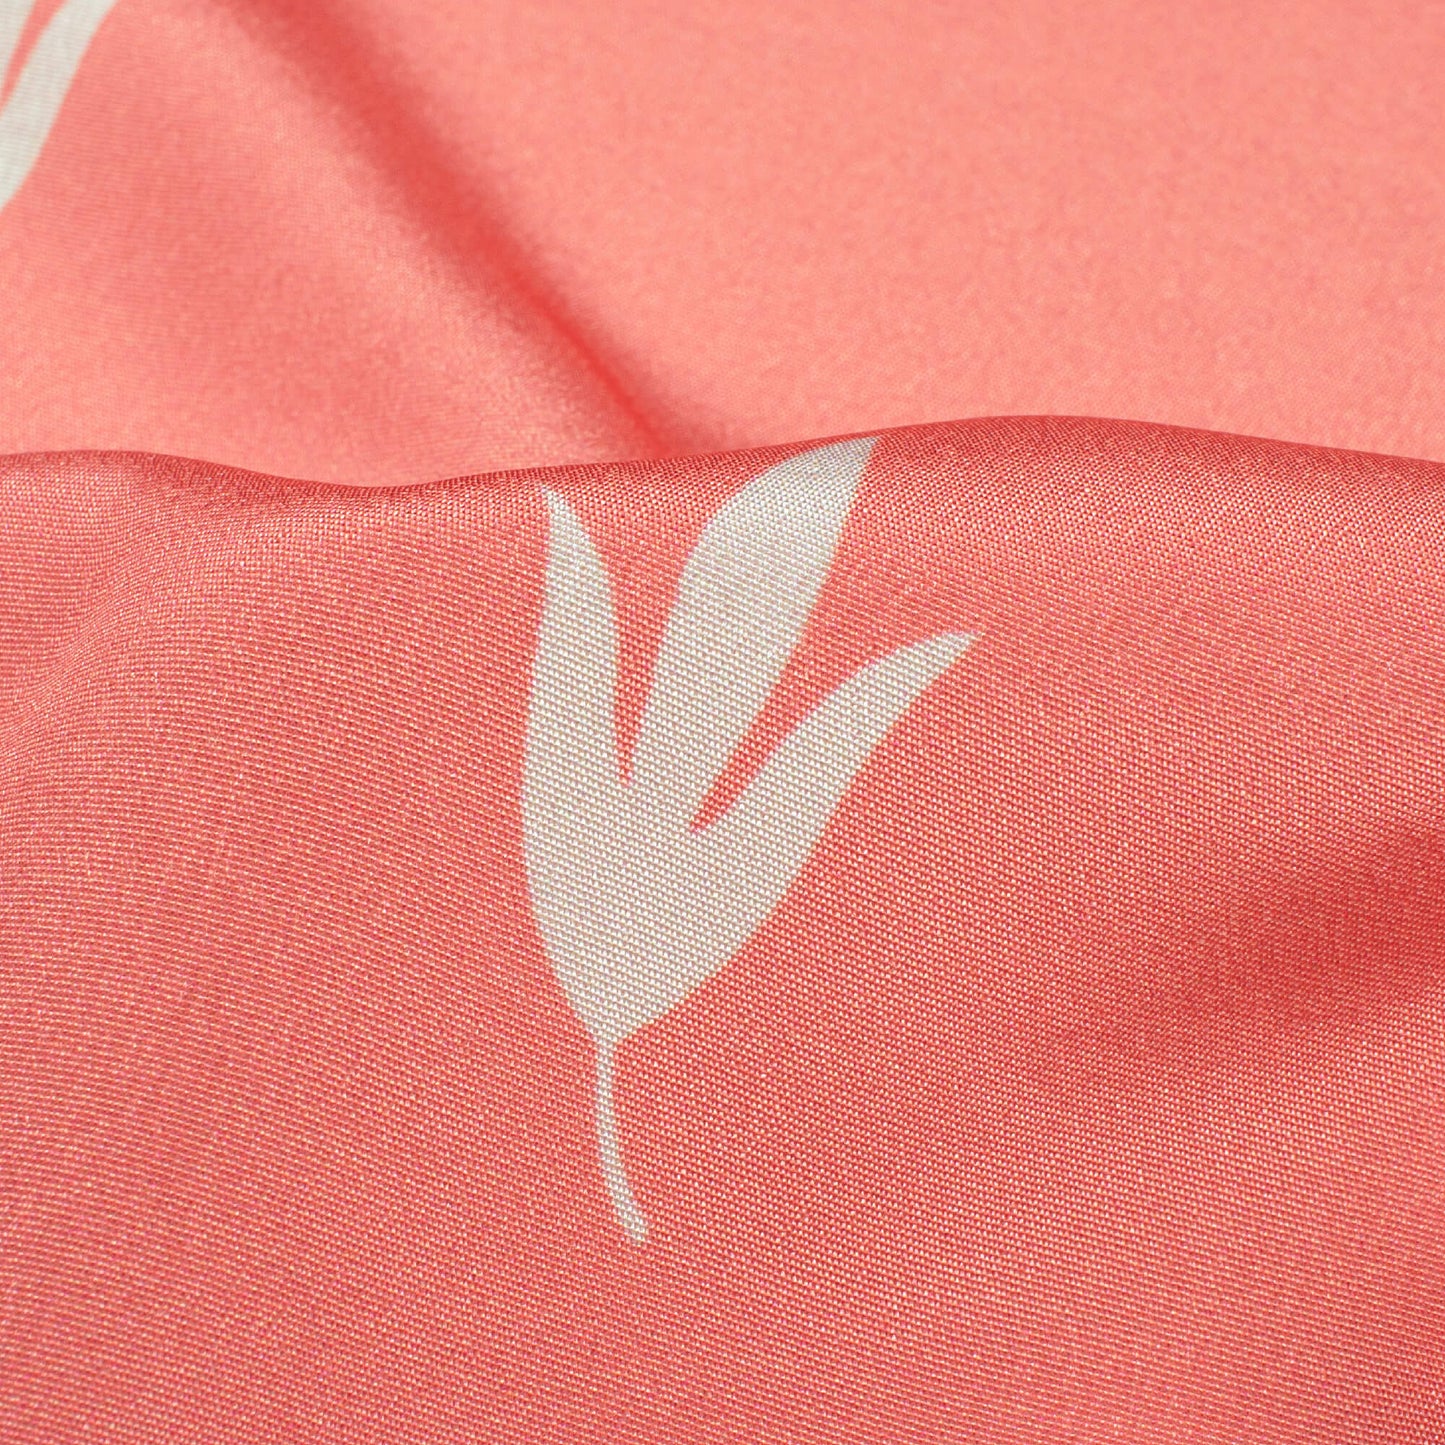 Coral Pink And White Leaf Pattern Digital Print Crepe Silk Fabric